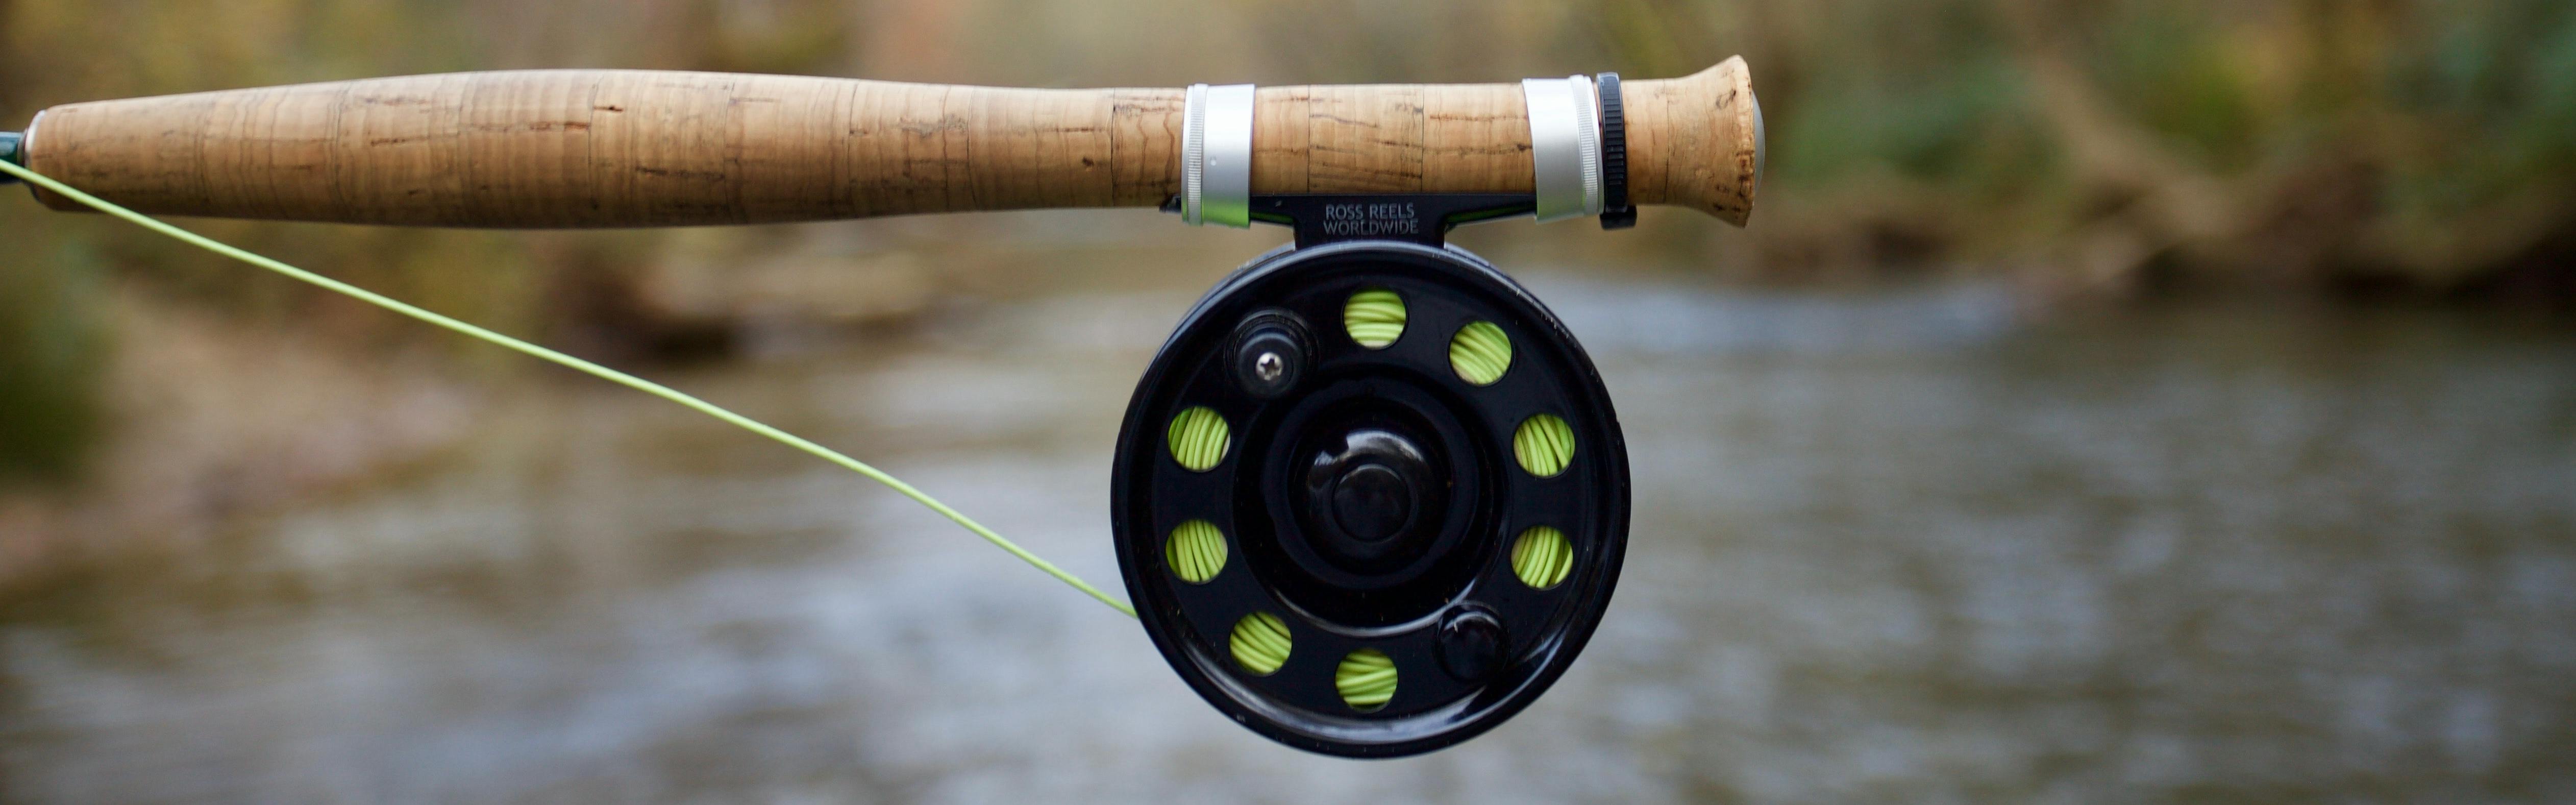 How to Repair A Broken Fly Fishing Rod